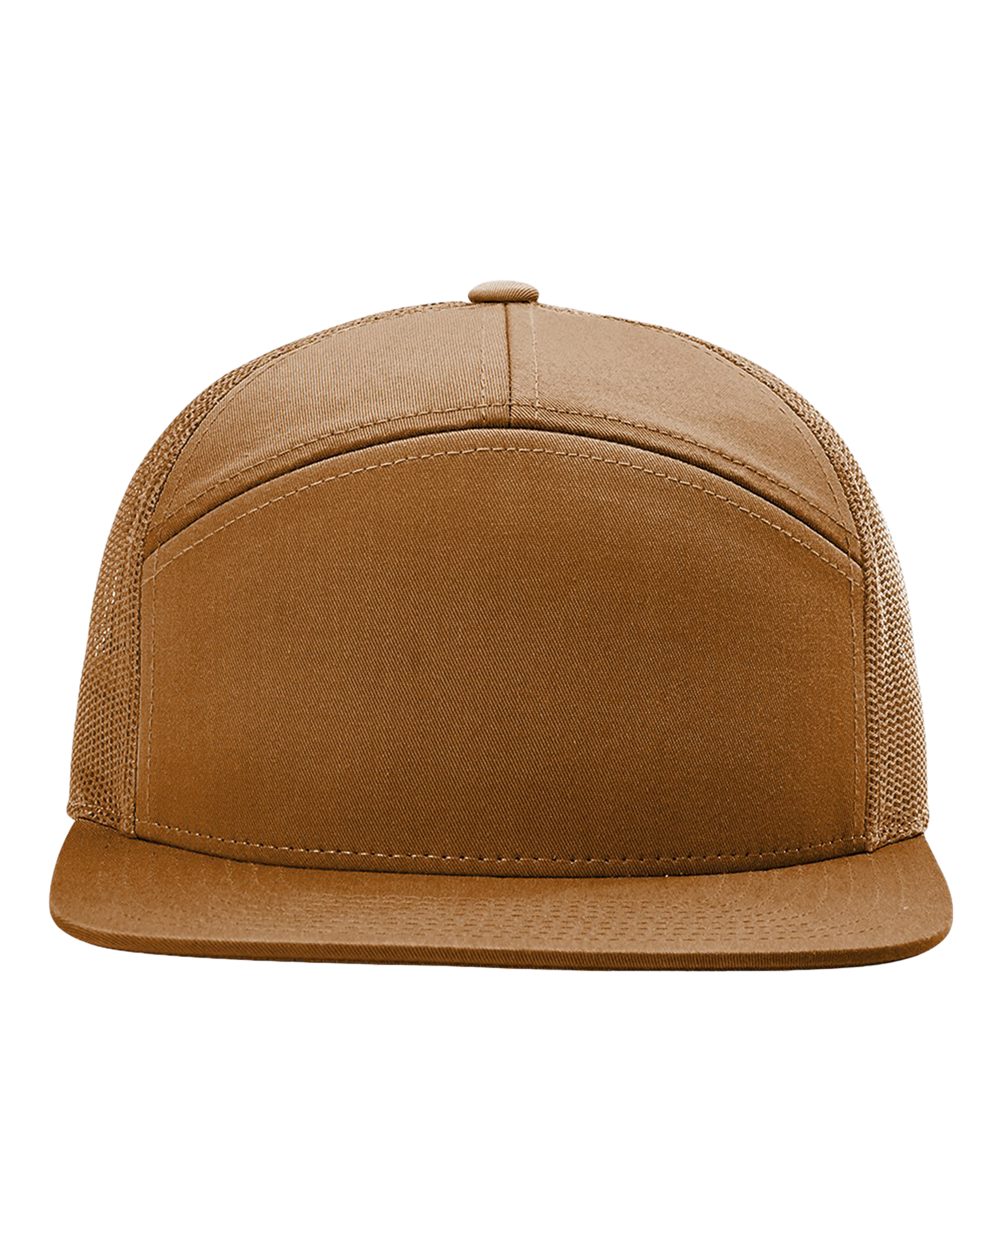 Richardson 168 Customized Trucker Hat with Leather Patch